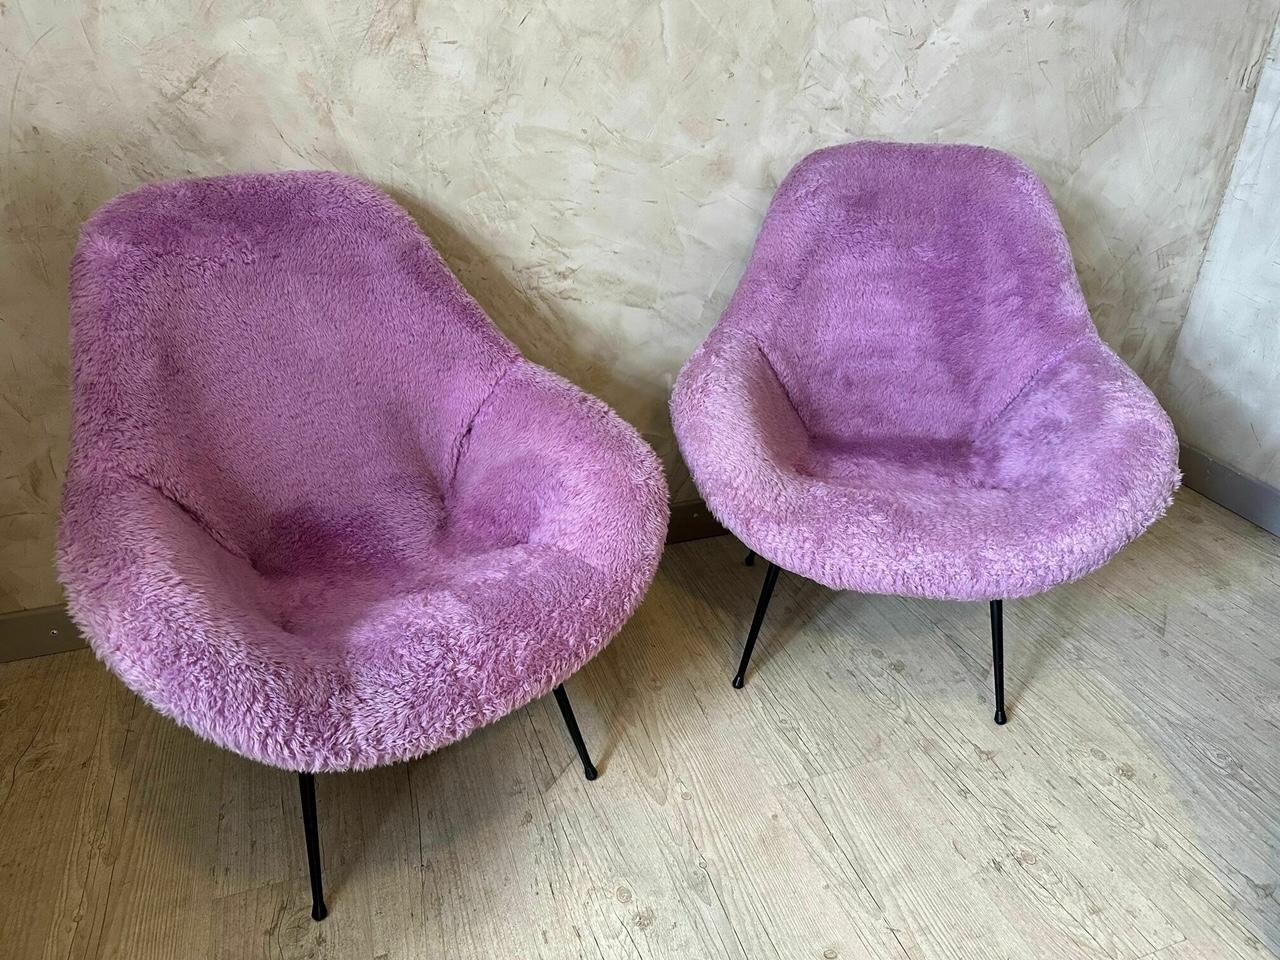 Pair of vintage cocktail chairs in black metal and purple wool in the style of Erton. Fiberglass shell covered with this very modern original purple wool and metal spindle feet. The back is also covered. Typical of the 50s. For lovers of design and